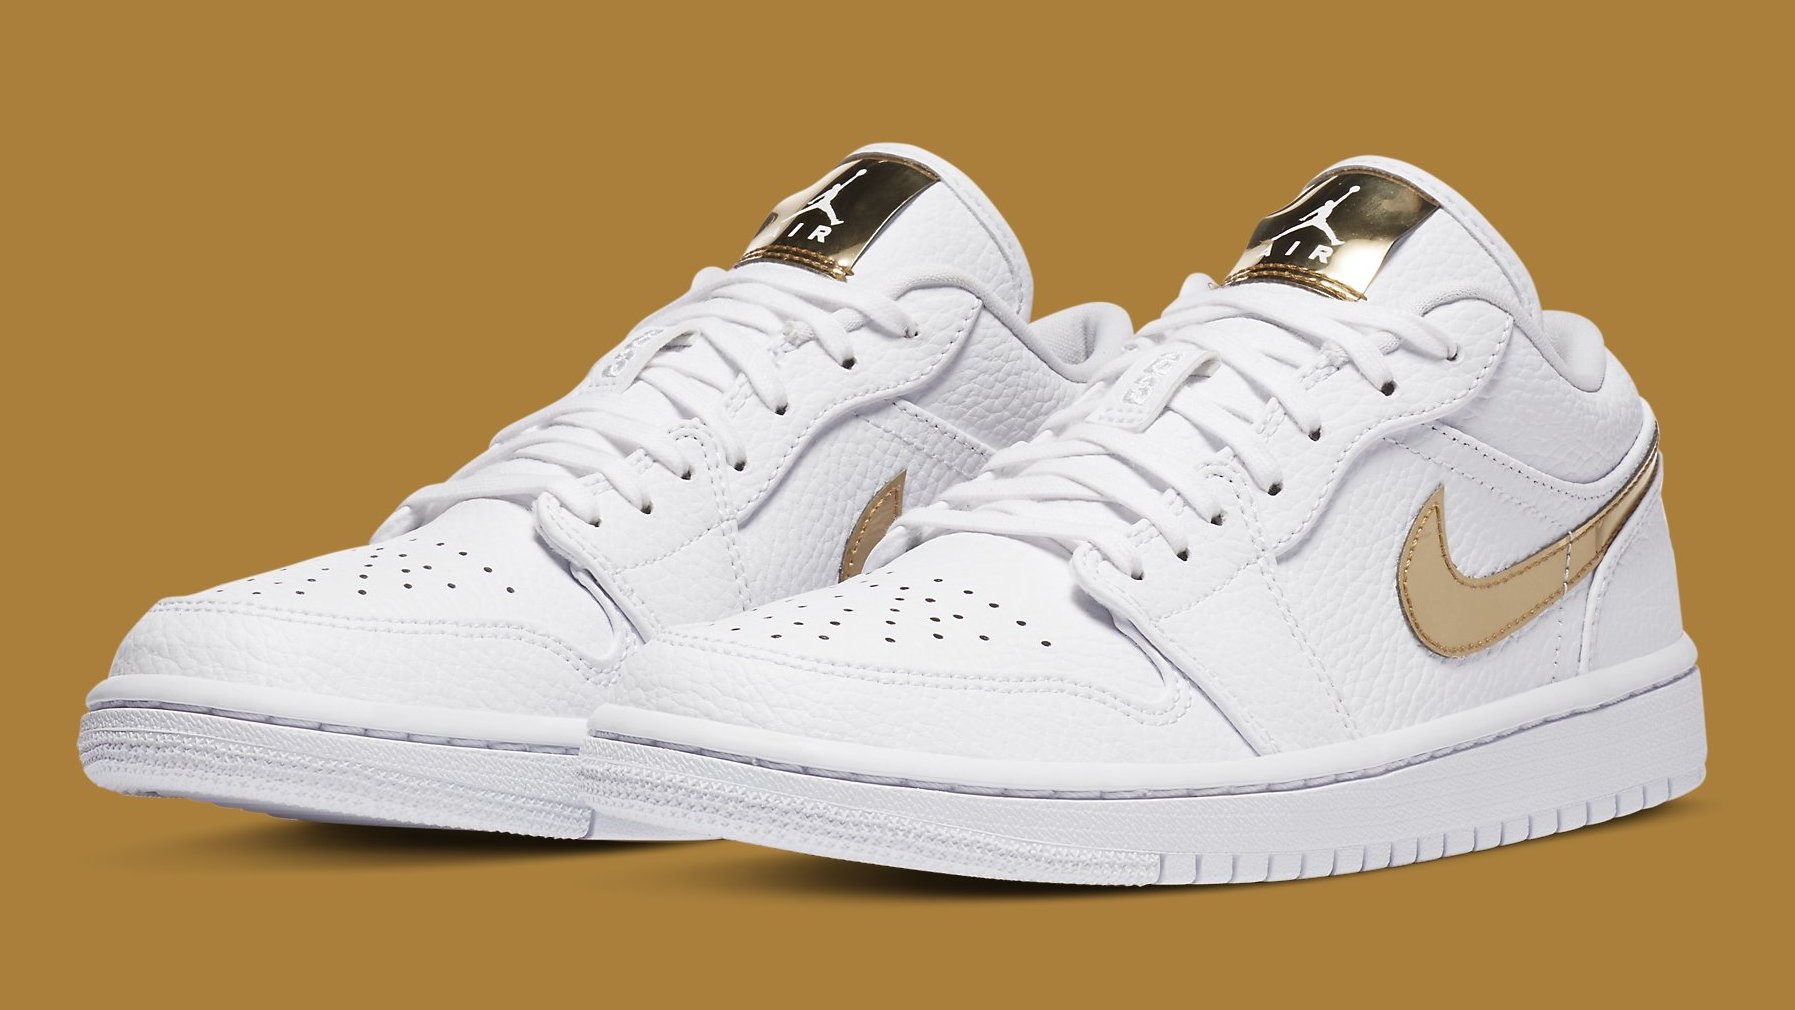 New 'Metallic Air Jordan 1 Lows Are on the Way | Complex